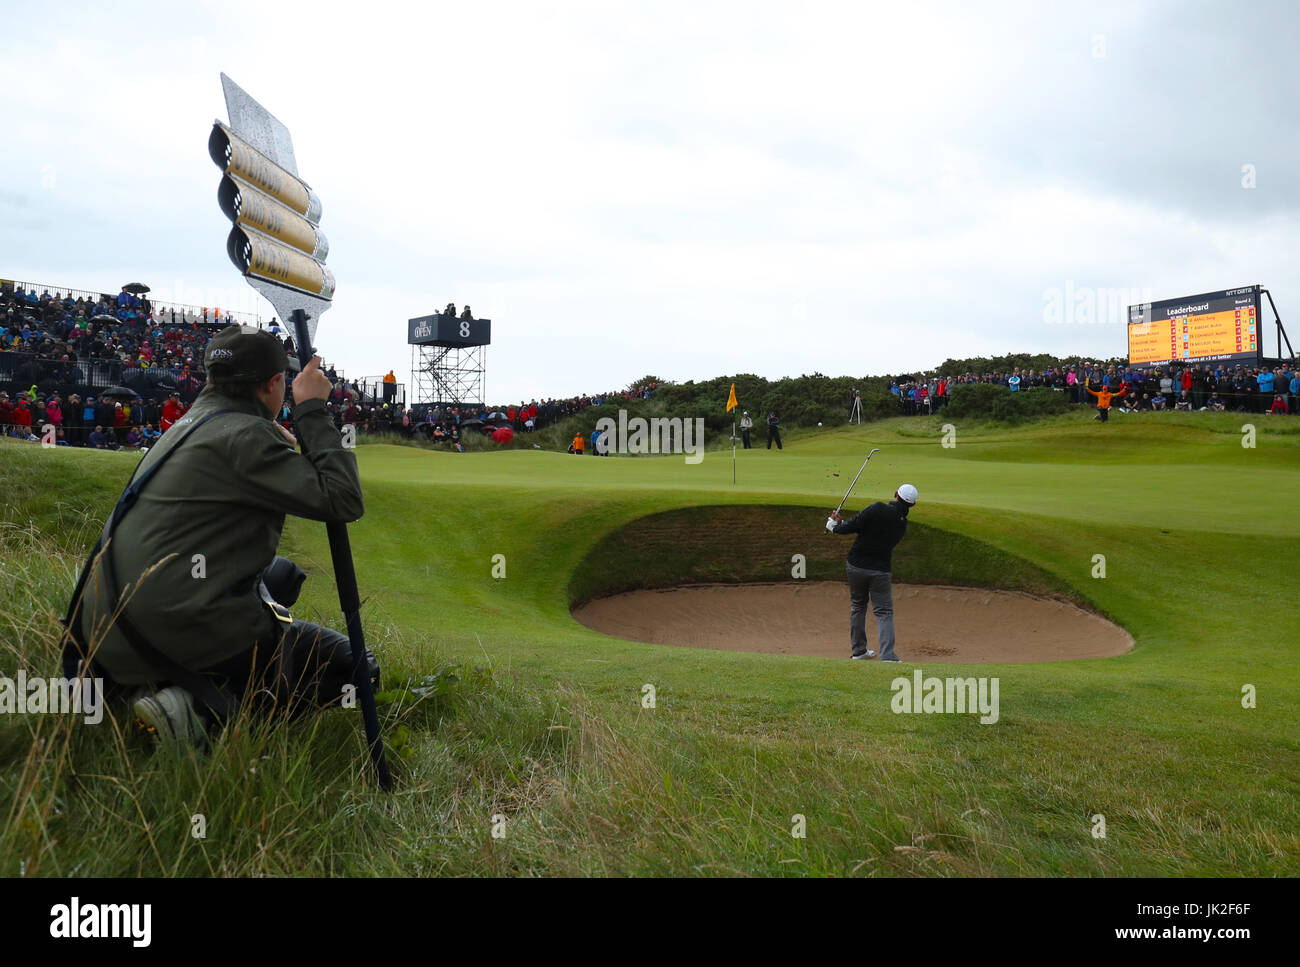 South Korea's Si-woo Kim chips out of a bunker on the 8th during day two of The Open Championship 2017 at Royal Birkdale Golf Club, Southport. PRESS ASSOCIATION Photo. Picture date: Friday July 21, 2017. See PA story Golf Open. Photo credit should read: Andrew Matthews/PA Wire. RESTRICTIONS: Editorial use only. No commercial use. Still image use only. The Open Championship logo and clear link to The Open website (TheOpen.com) to be included on website publishing. Call +44 (0)1158 447447 for further information. Stock Photo